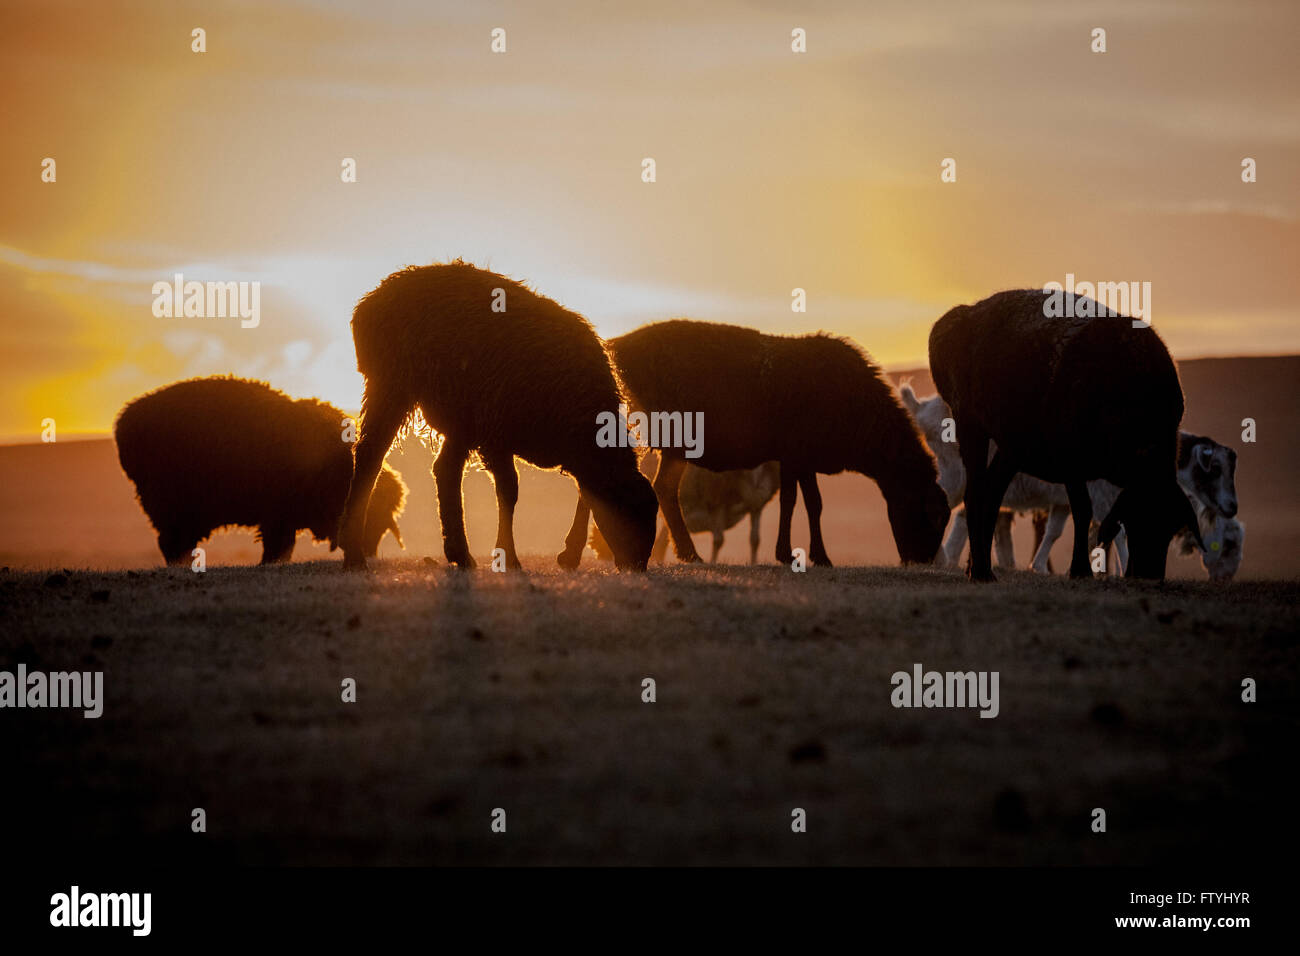 Kyrgyzstan, Kirghizistan, Song Kul lake, Asia, Central Asia, sheep grazing in sunset. Stock Photo